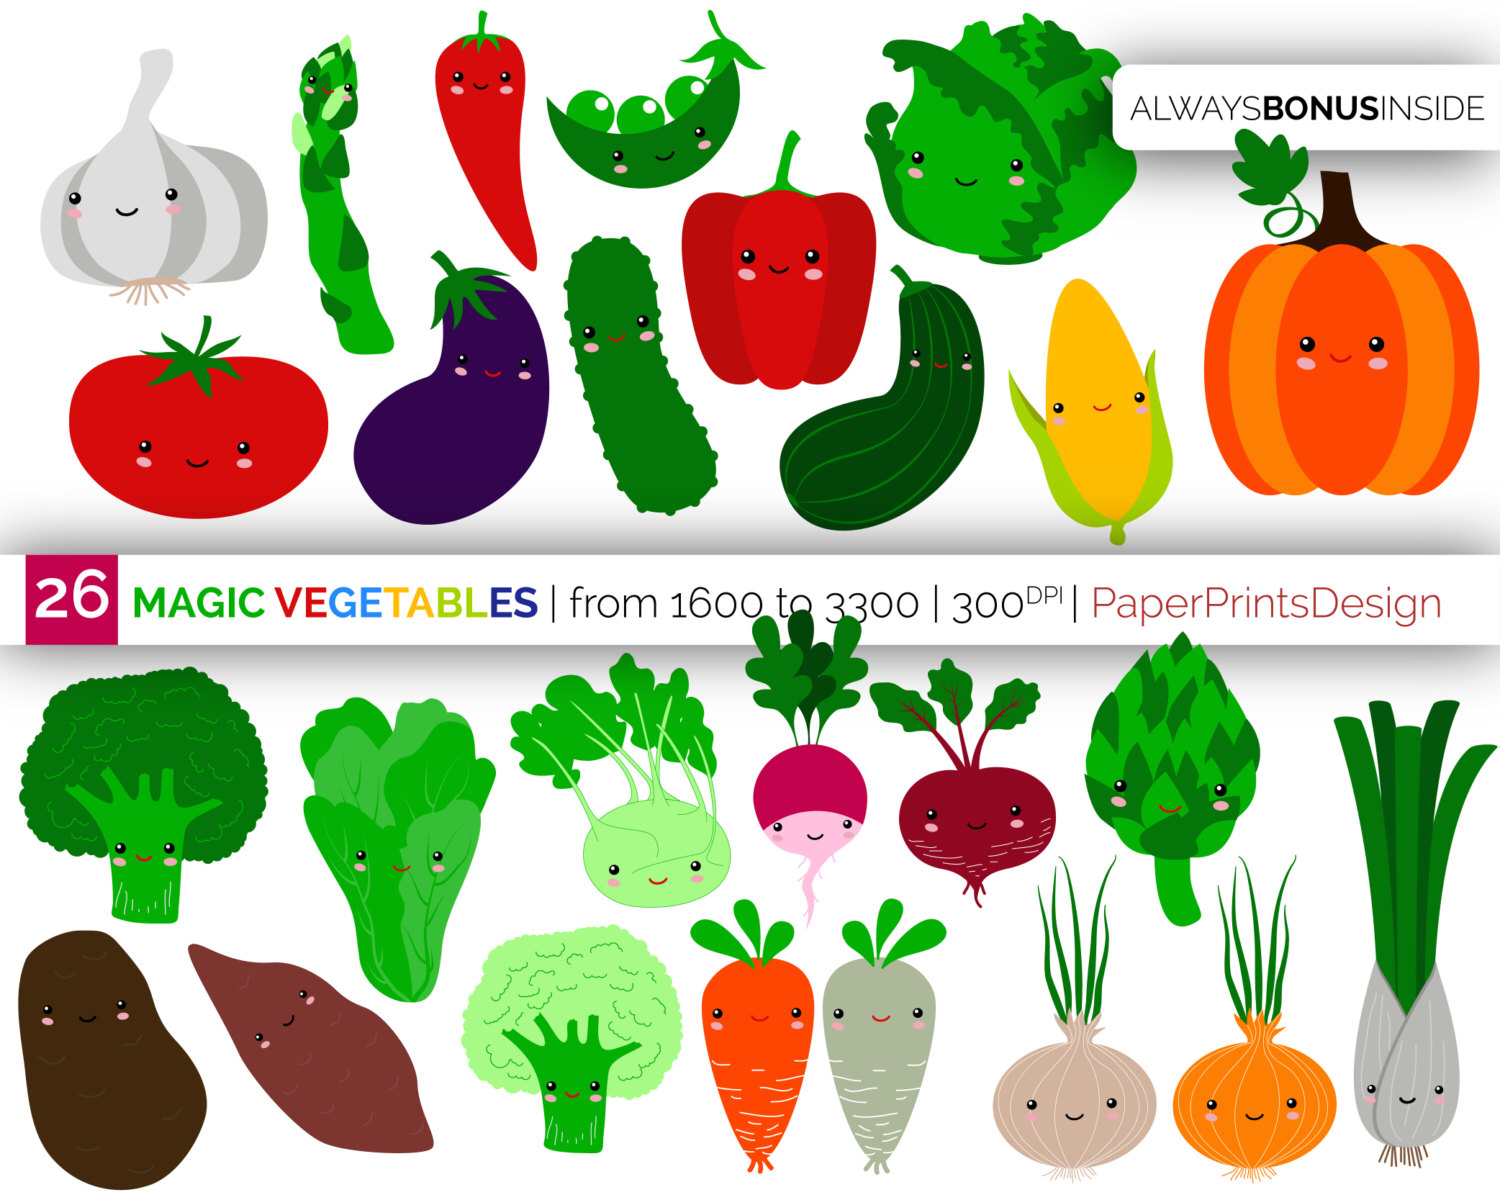 17 Best ideas about Food Clipart on Pinterest.